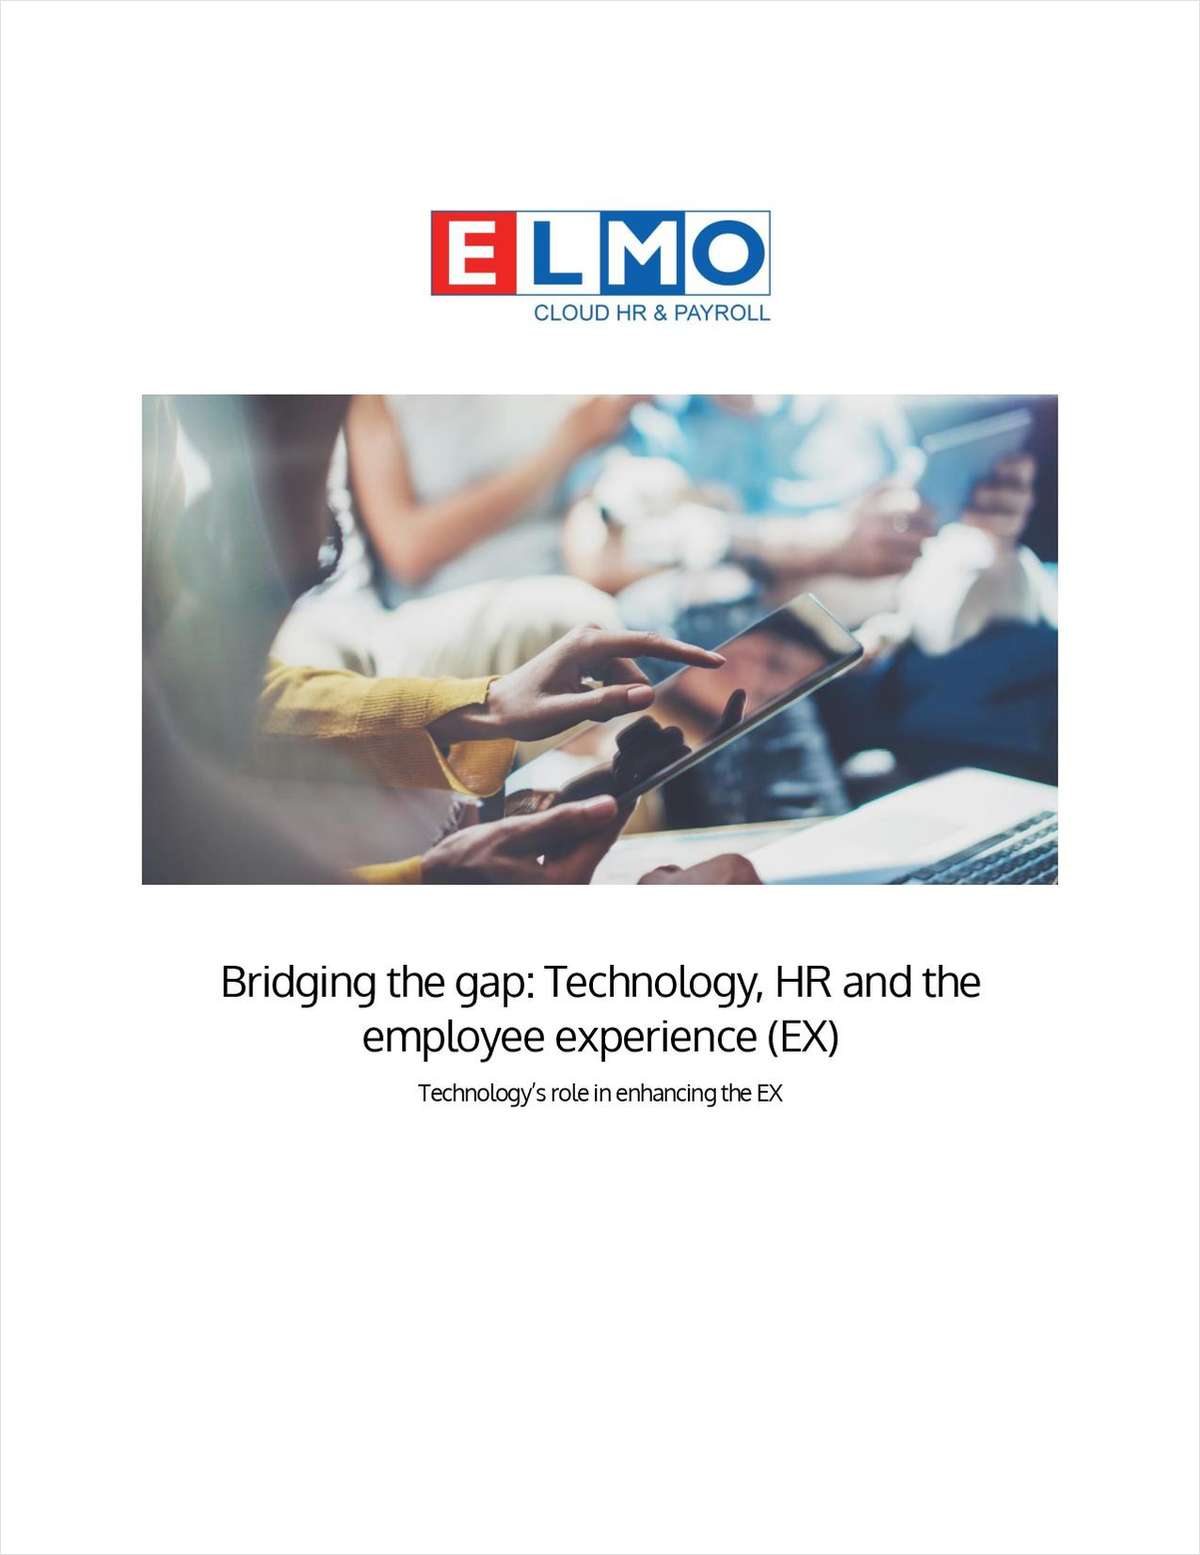 HR, Tech and the employee experience